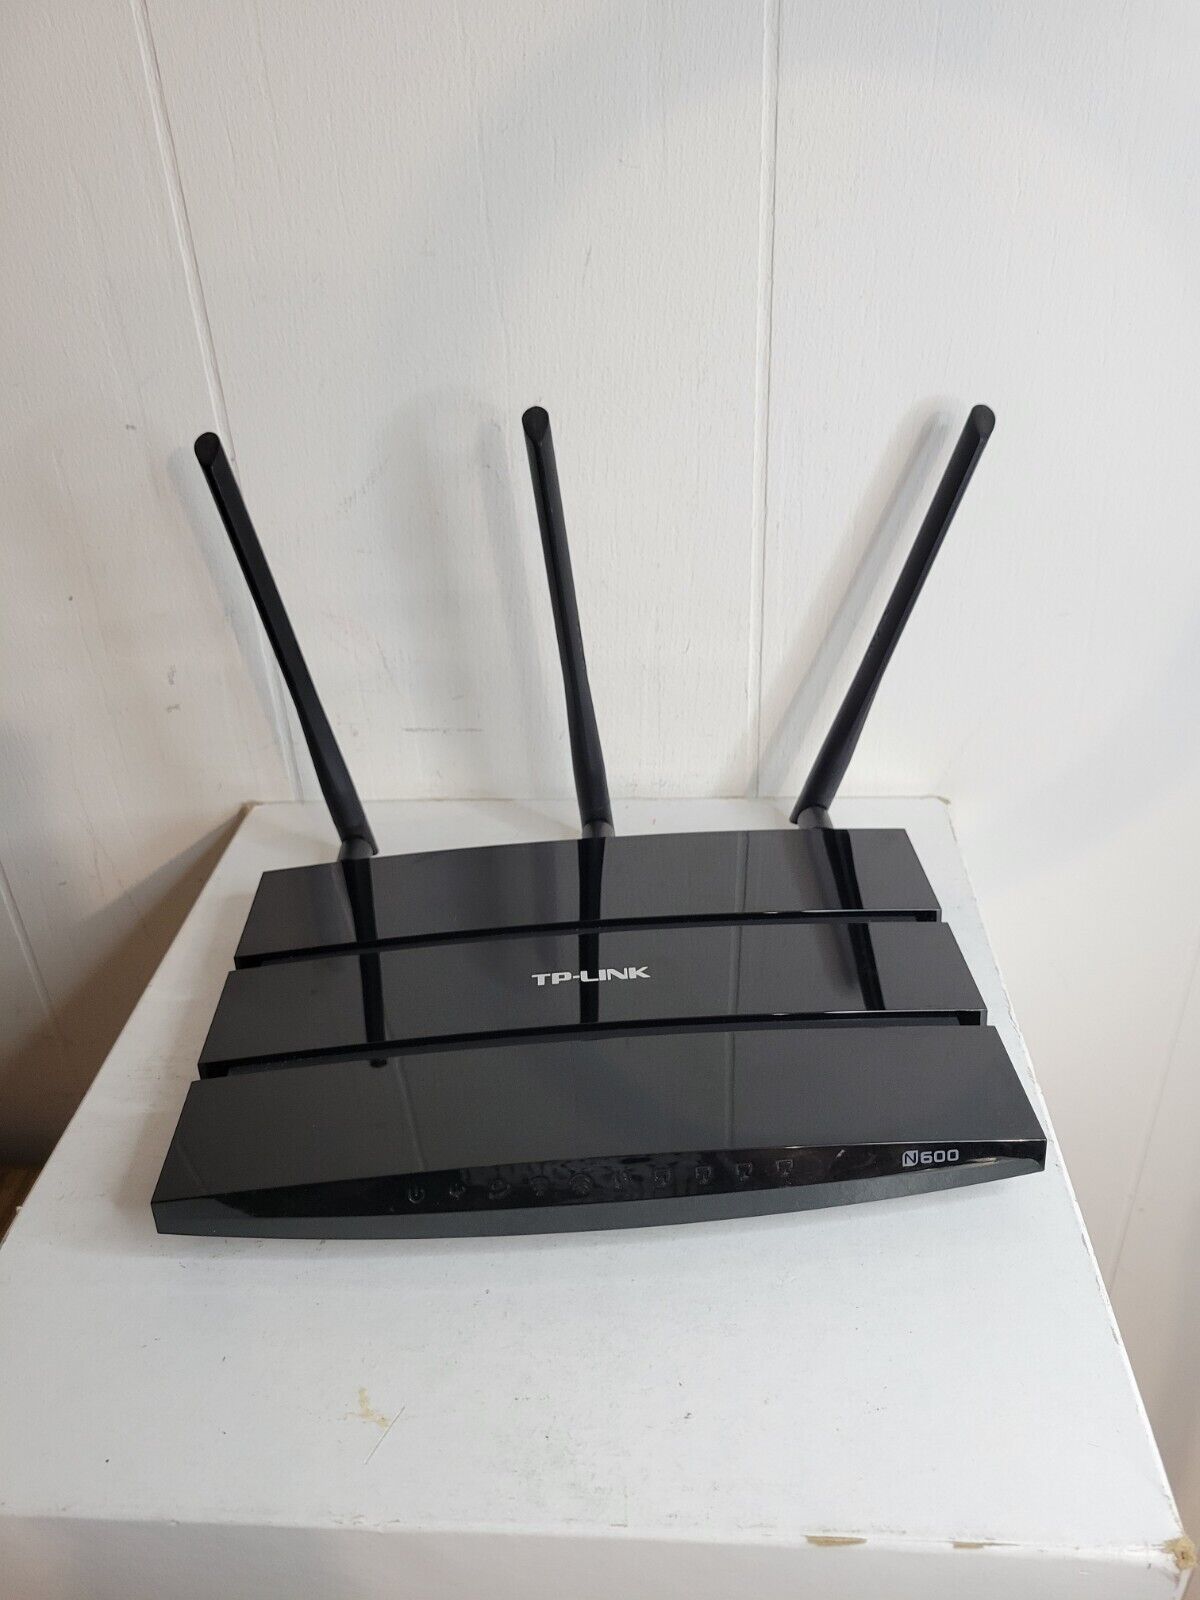 TP-LINK N600 Wireless Dual Band Gigabit ADSL2+ Modem Router TD-W8980 No Adapter 